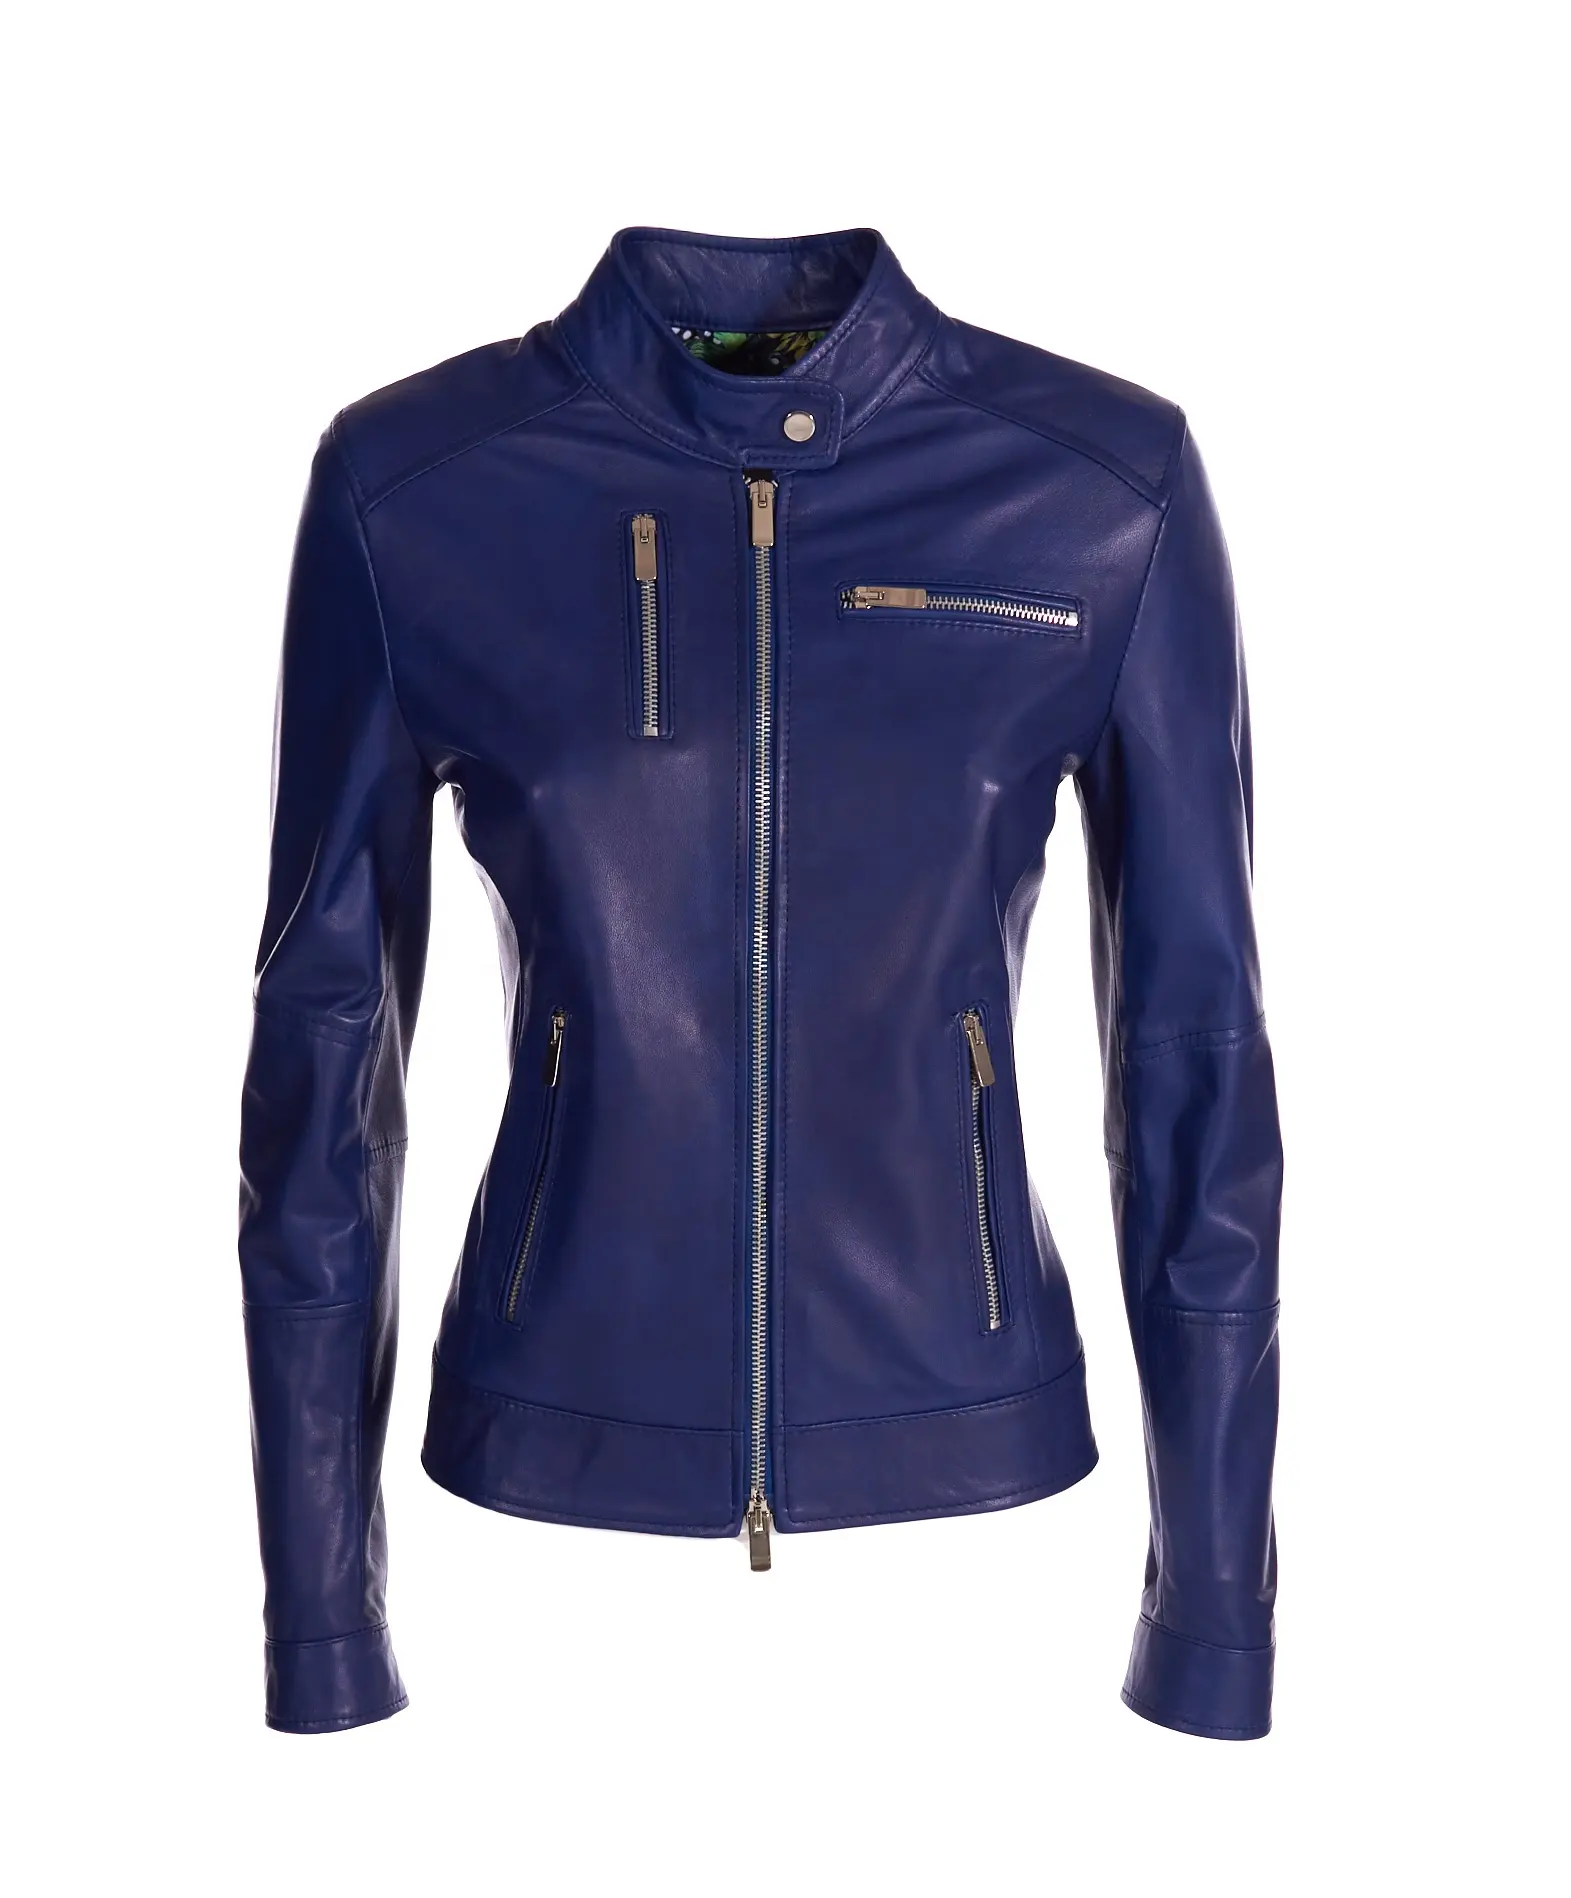 Best Made In Italy blue leather jacket OEM services high quality 100% Italian lamb leather biker women daily wear clothes